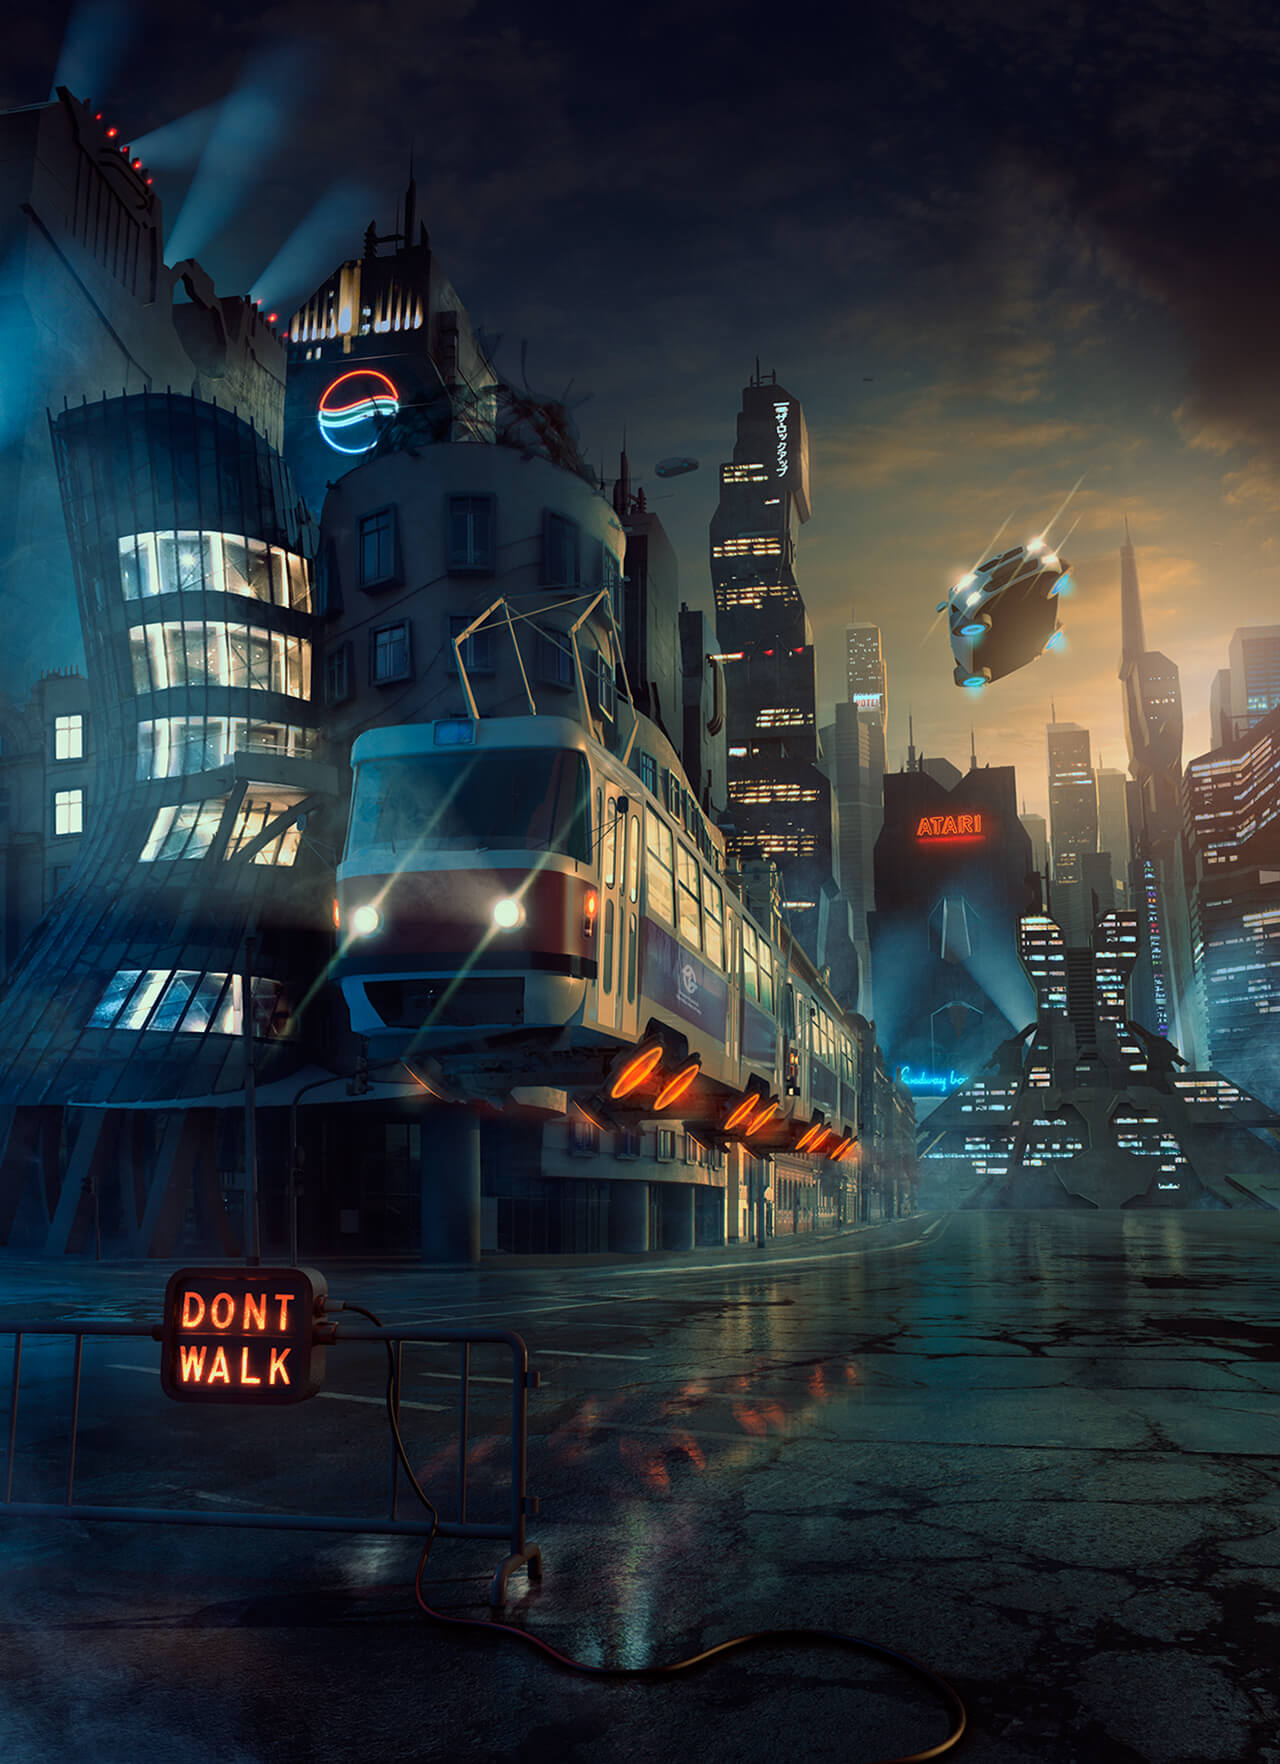 Computer generated image of a futuristic street at night with flying car and flying tram